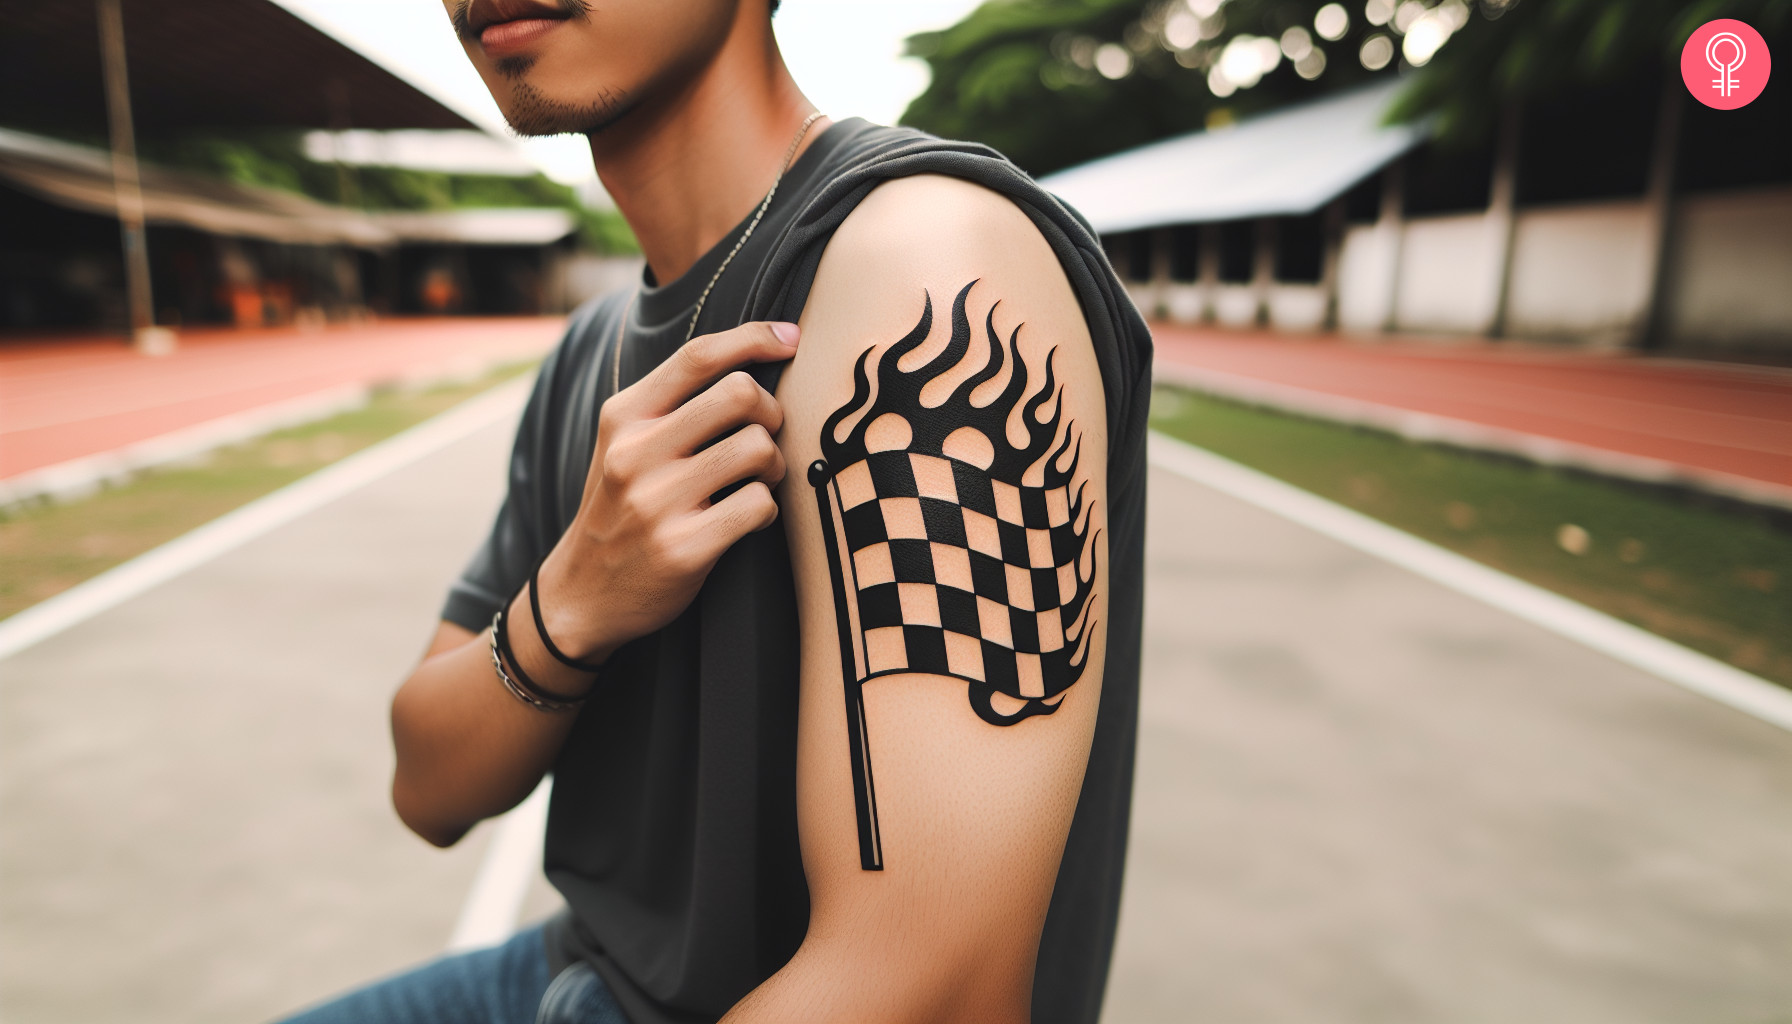 Flame checkered flag tattoo on a woman’s arm